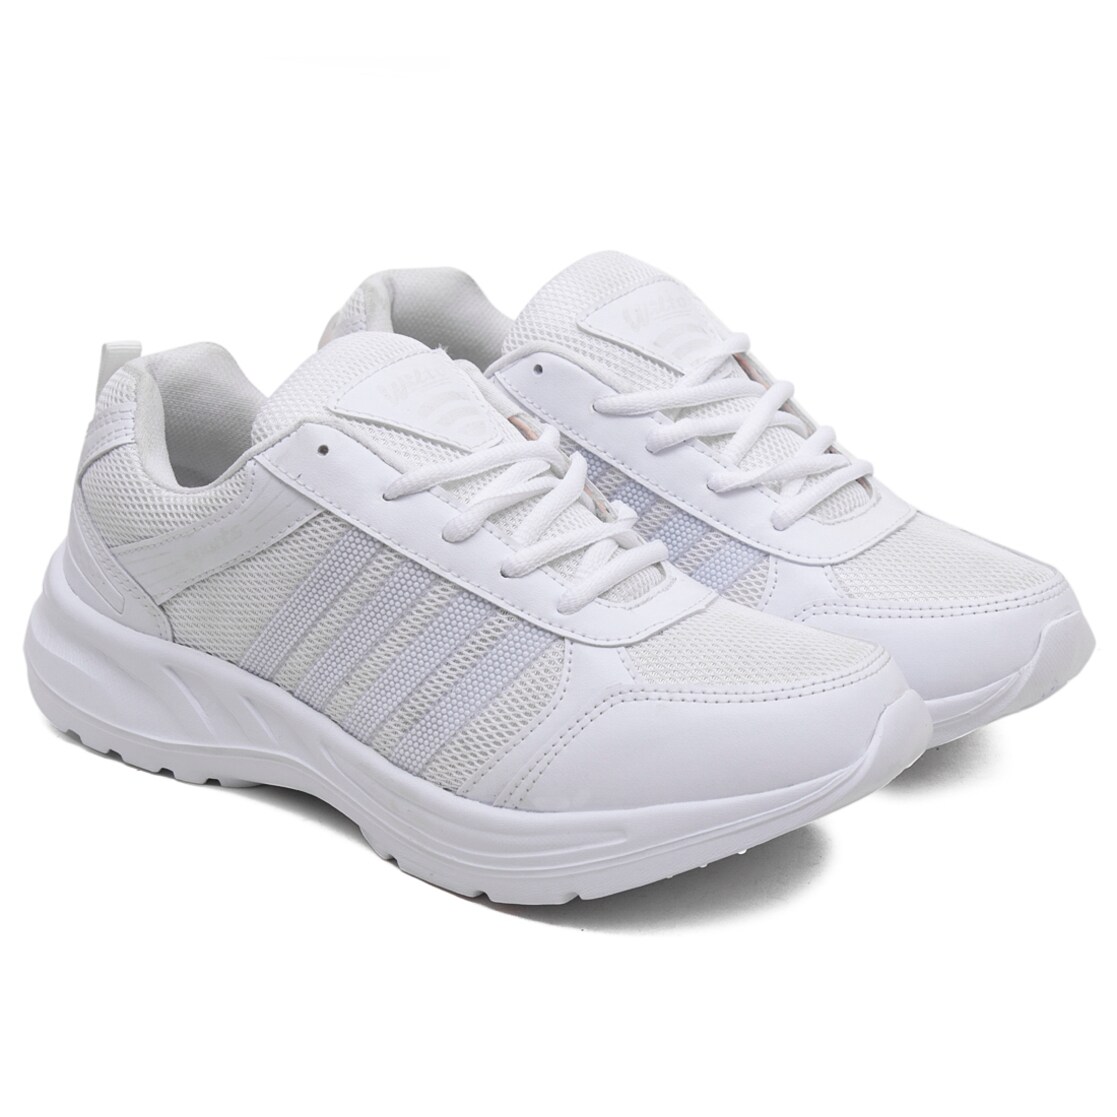 asian white sports shoes